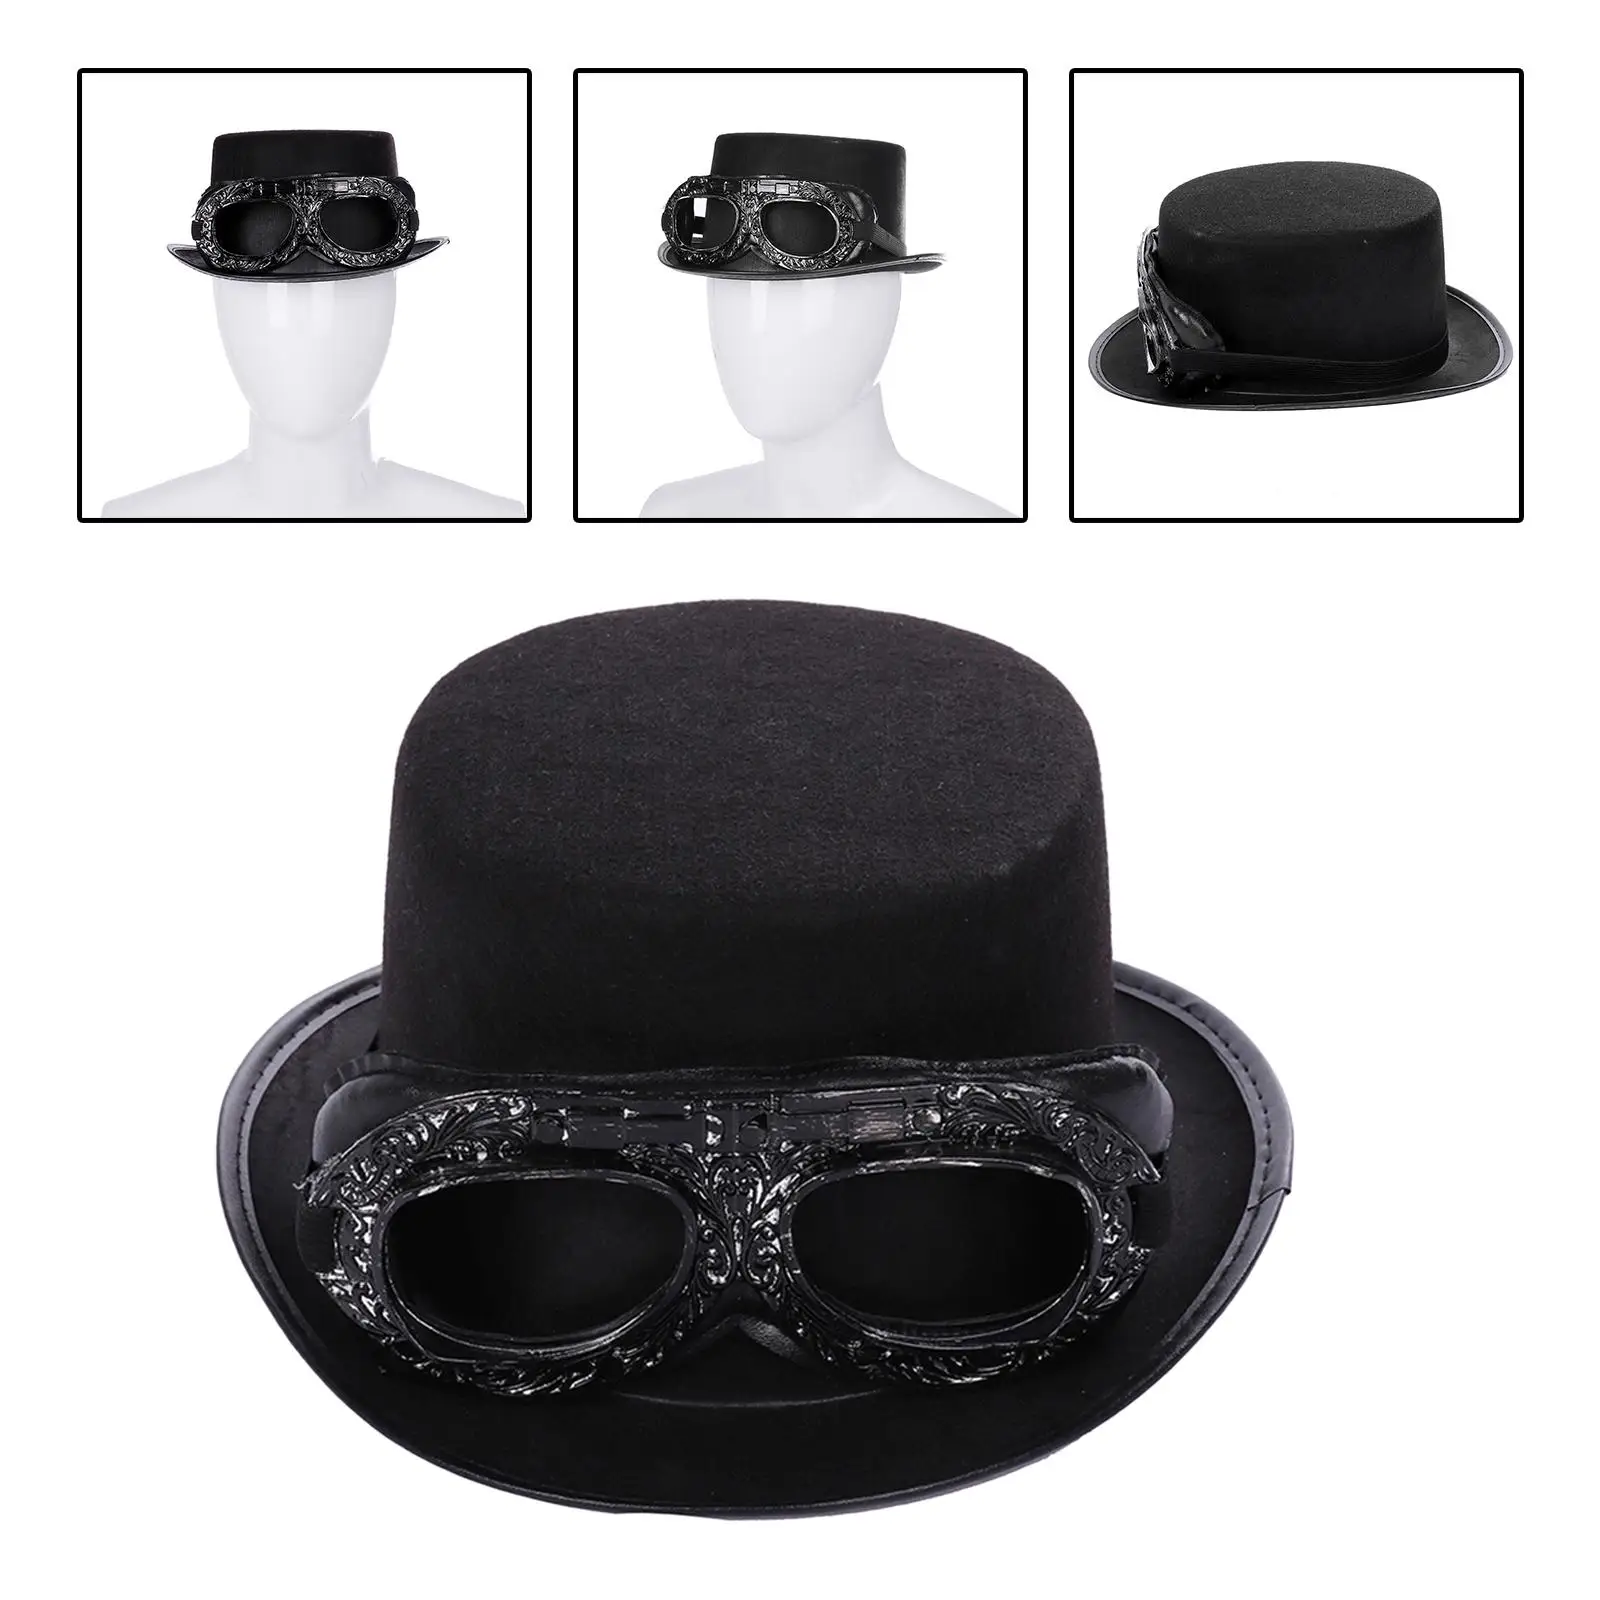 Deluxe Black Steampunk Top Hat with Goggles Costume Top Hat Cosplay Classic Formal Gothic Headgear for Unisex Dress Party